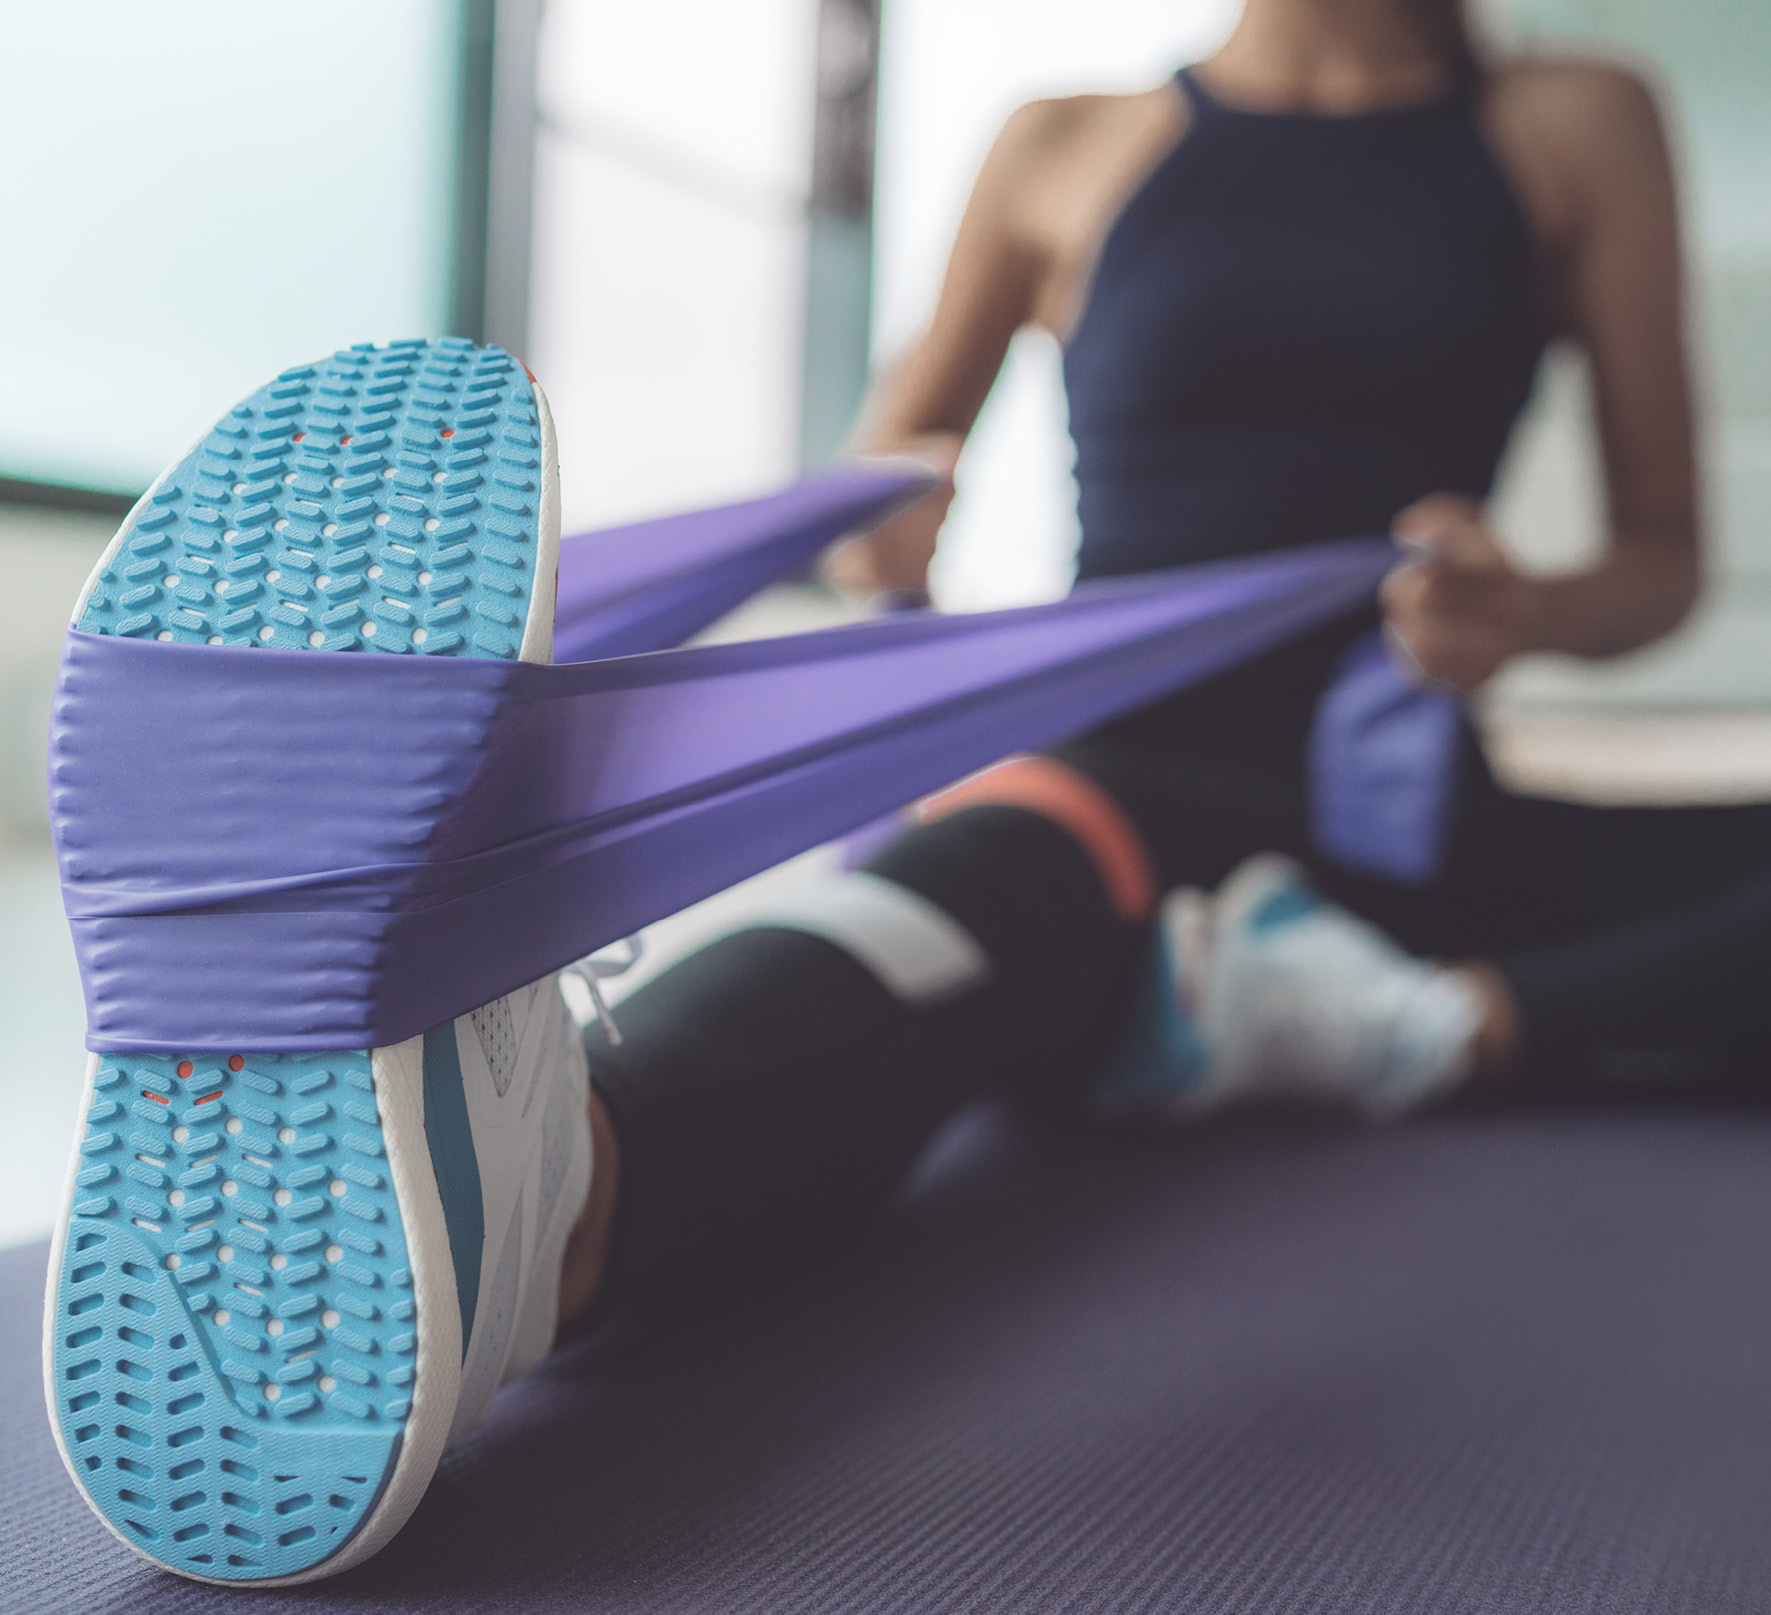 5 Ways to Avoid Injury During a Workout